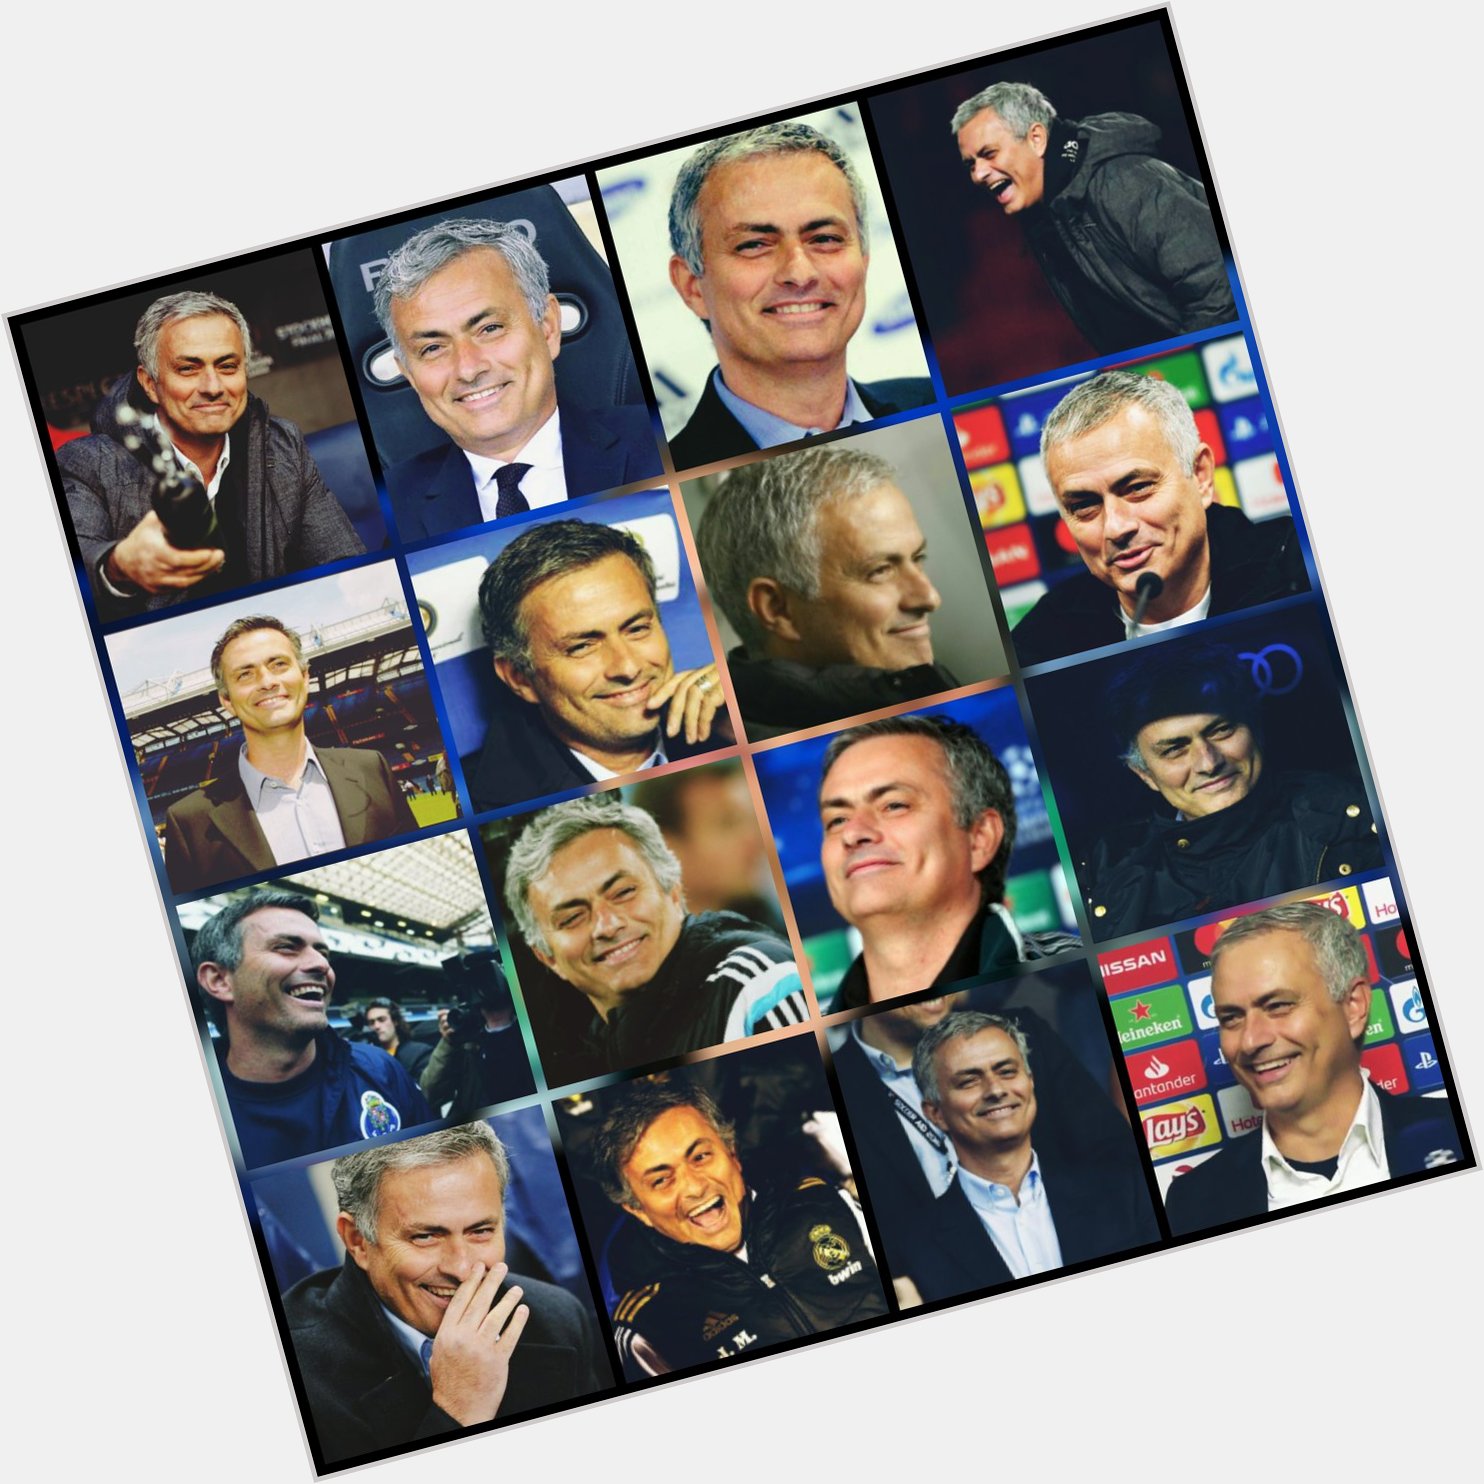 Happy 56th Birthday to Jose Mourinho the best manager I have ever seen

May the smile never leaves his face 